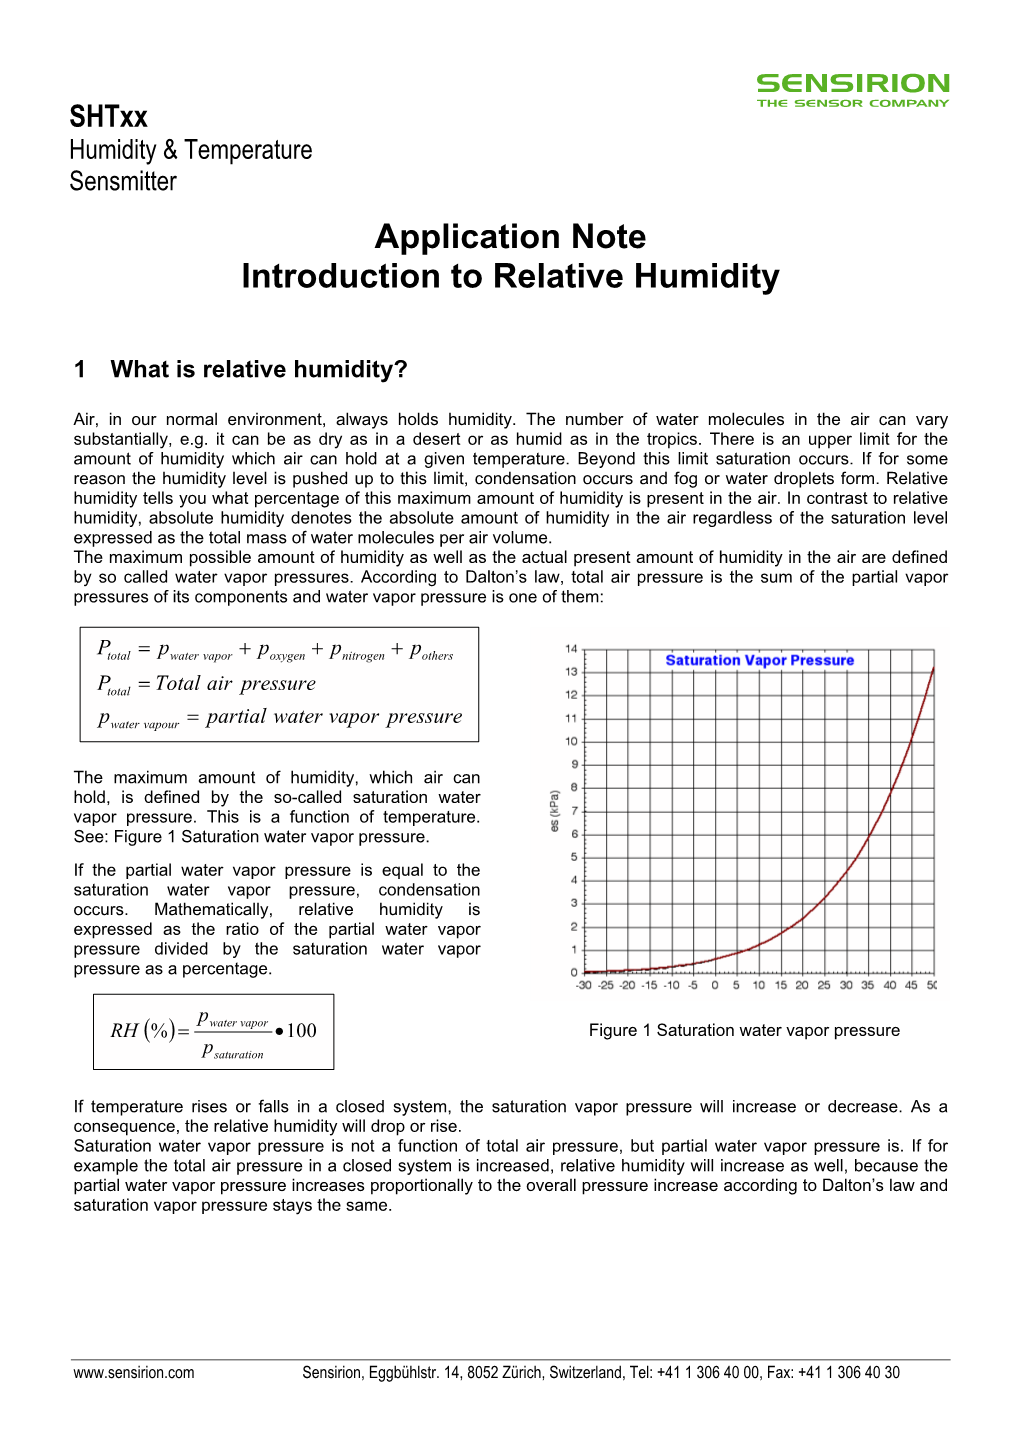 Application Note Introduction to Relative Humidity